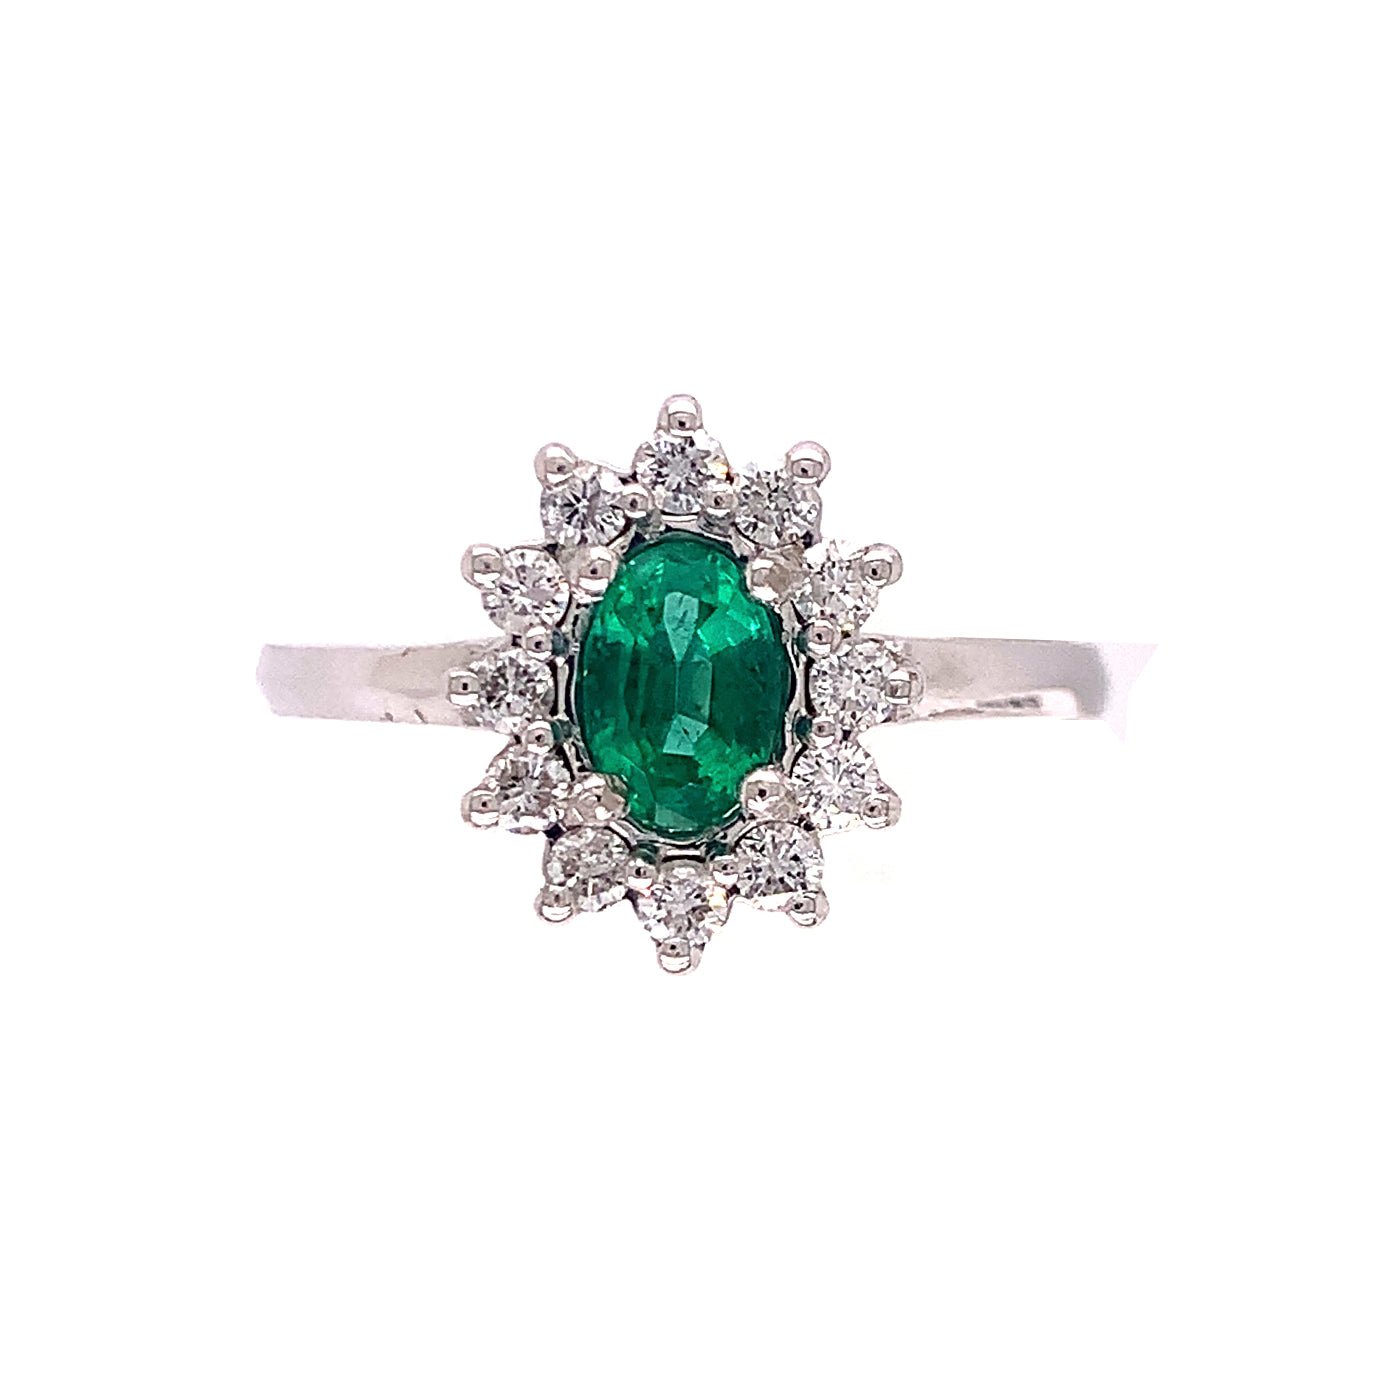 White Gold Emerald and Diamond Ring